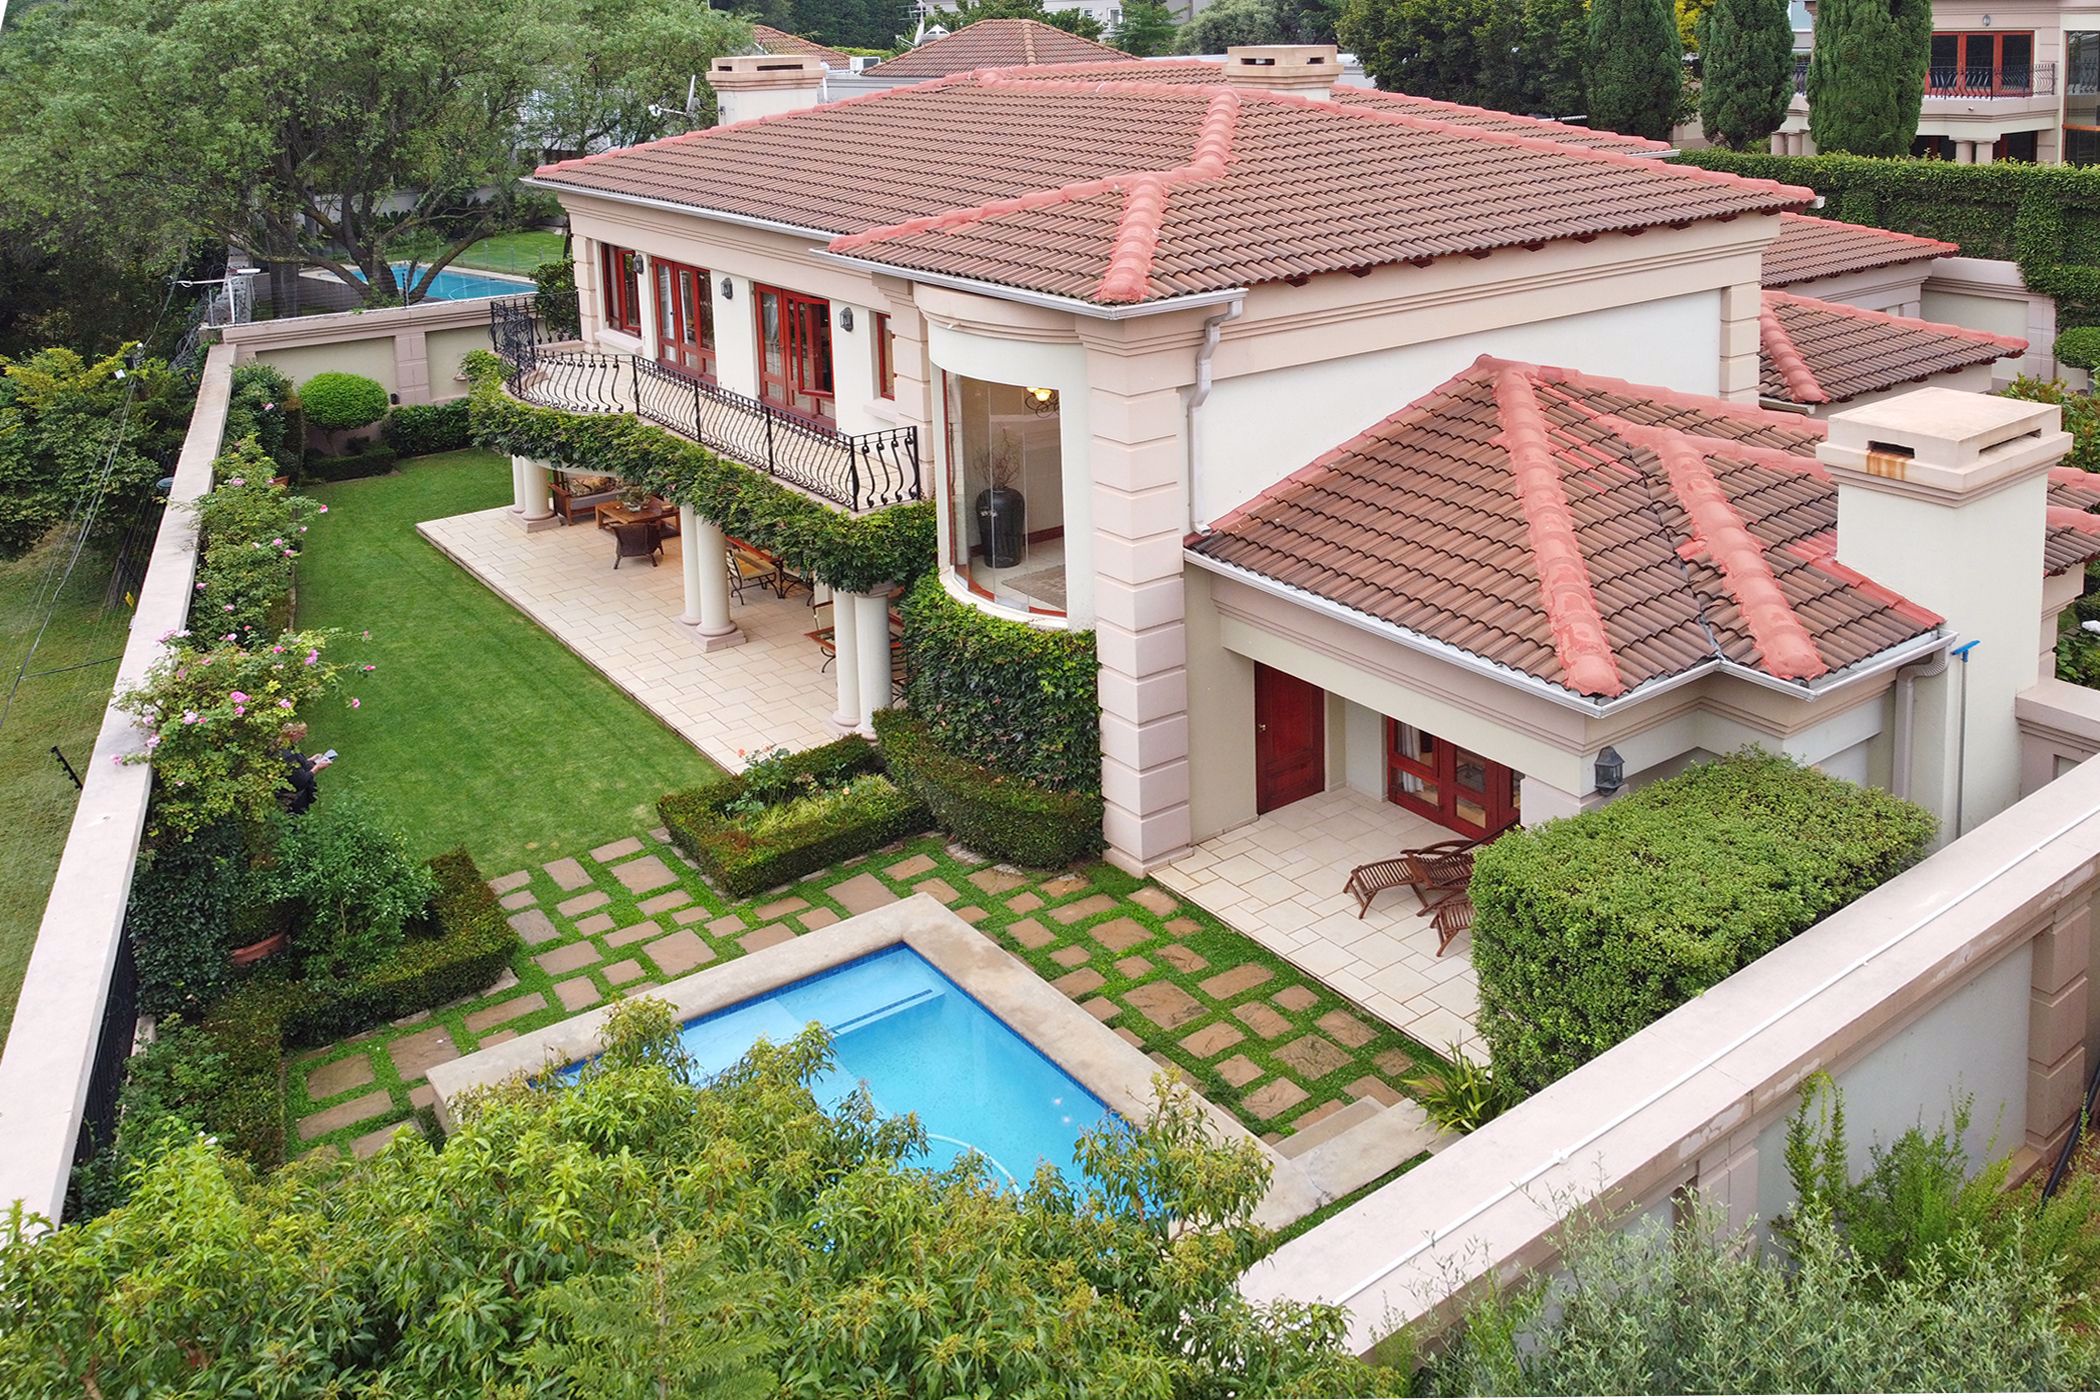 Classic & Spacious 3 Bedroom Cluster House For Sale in Hyde Park, Sandton